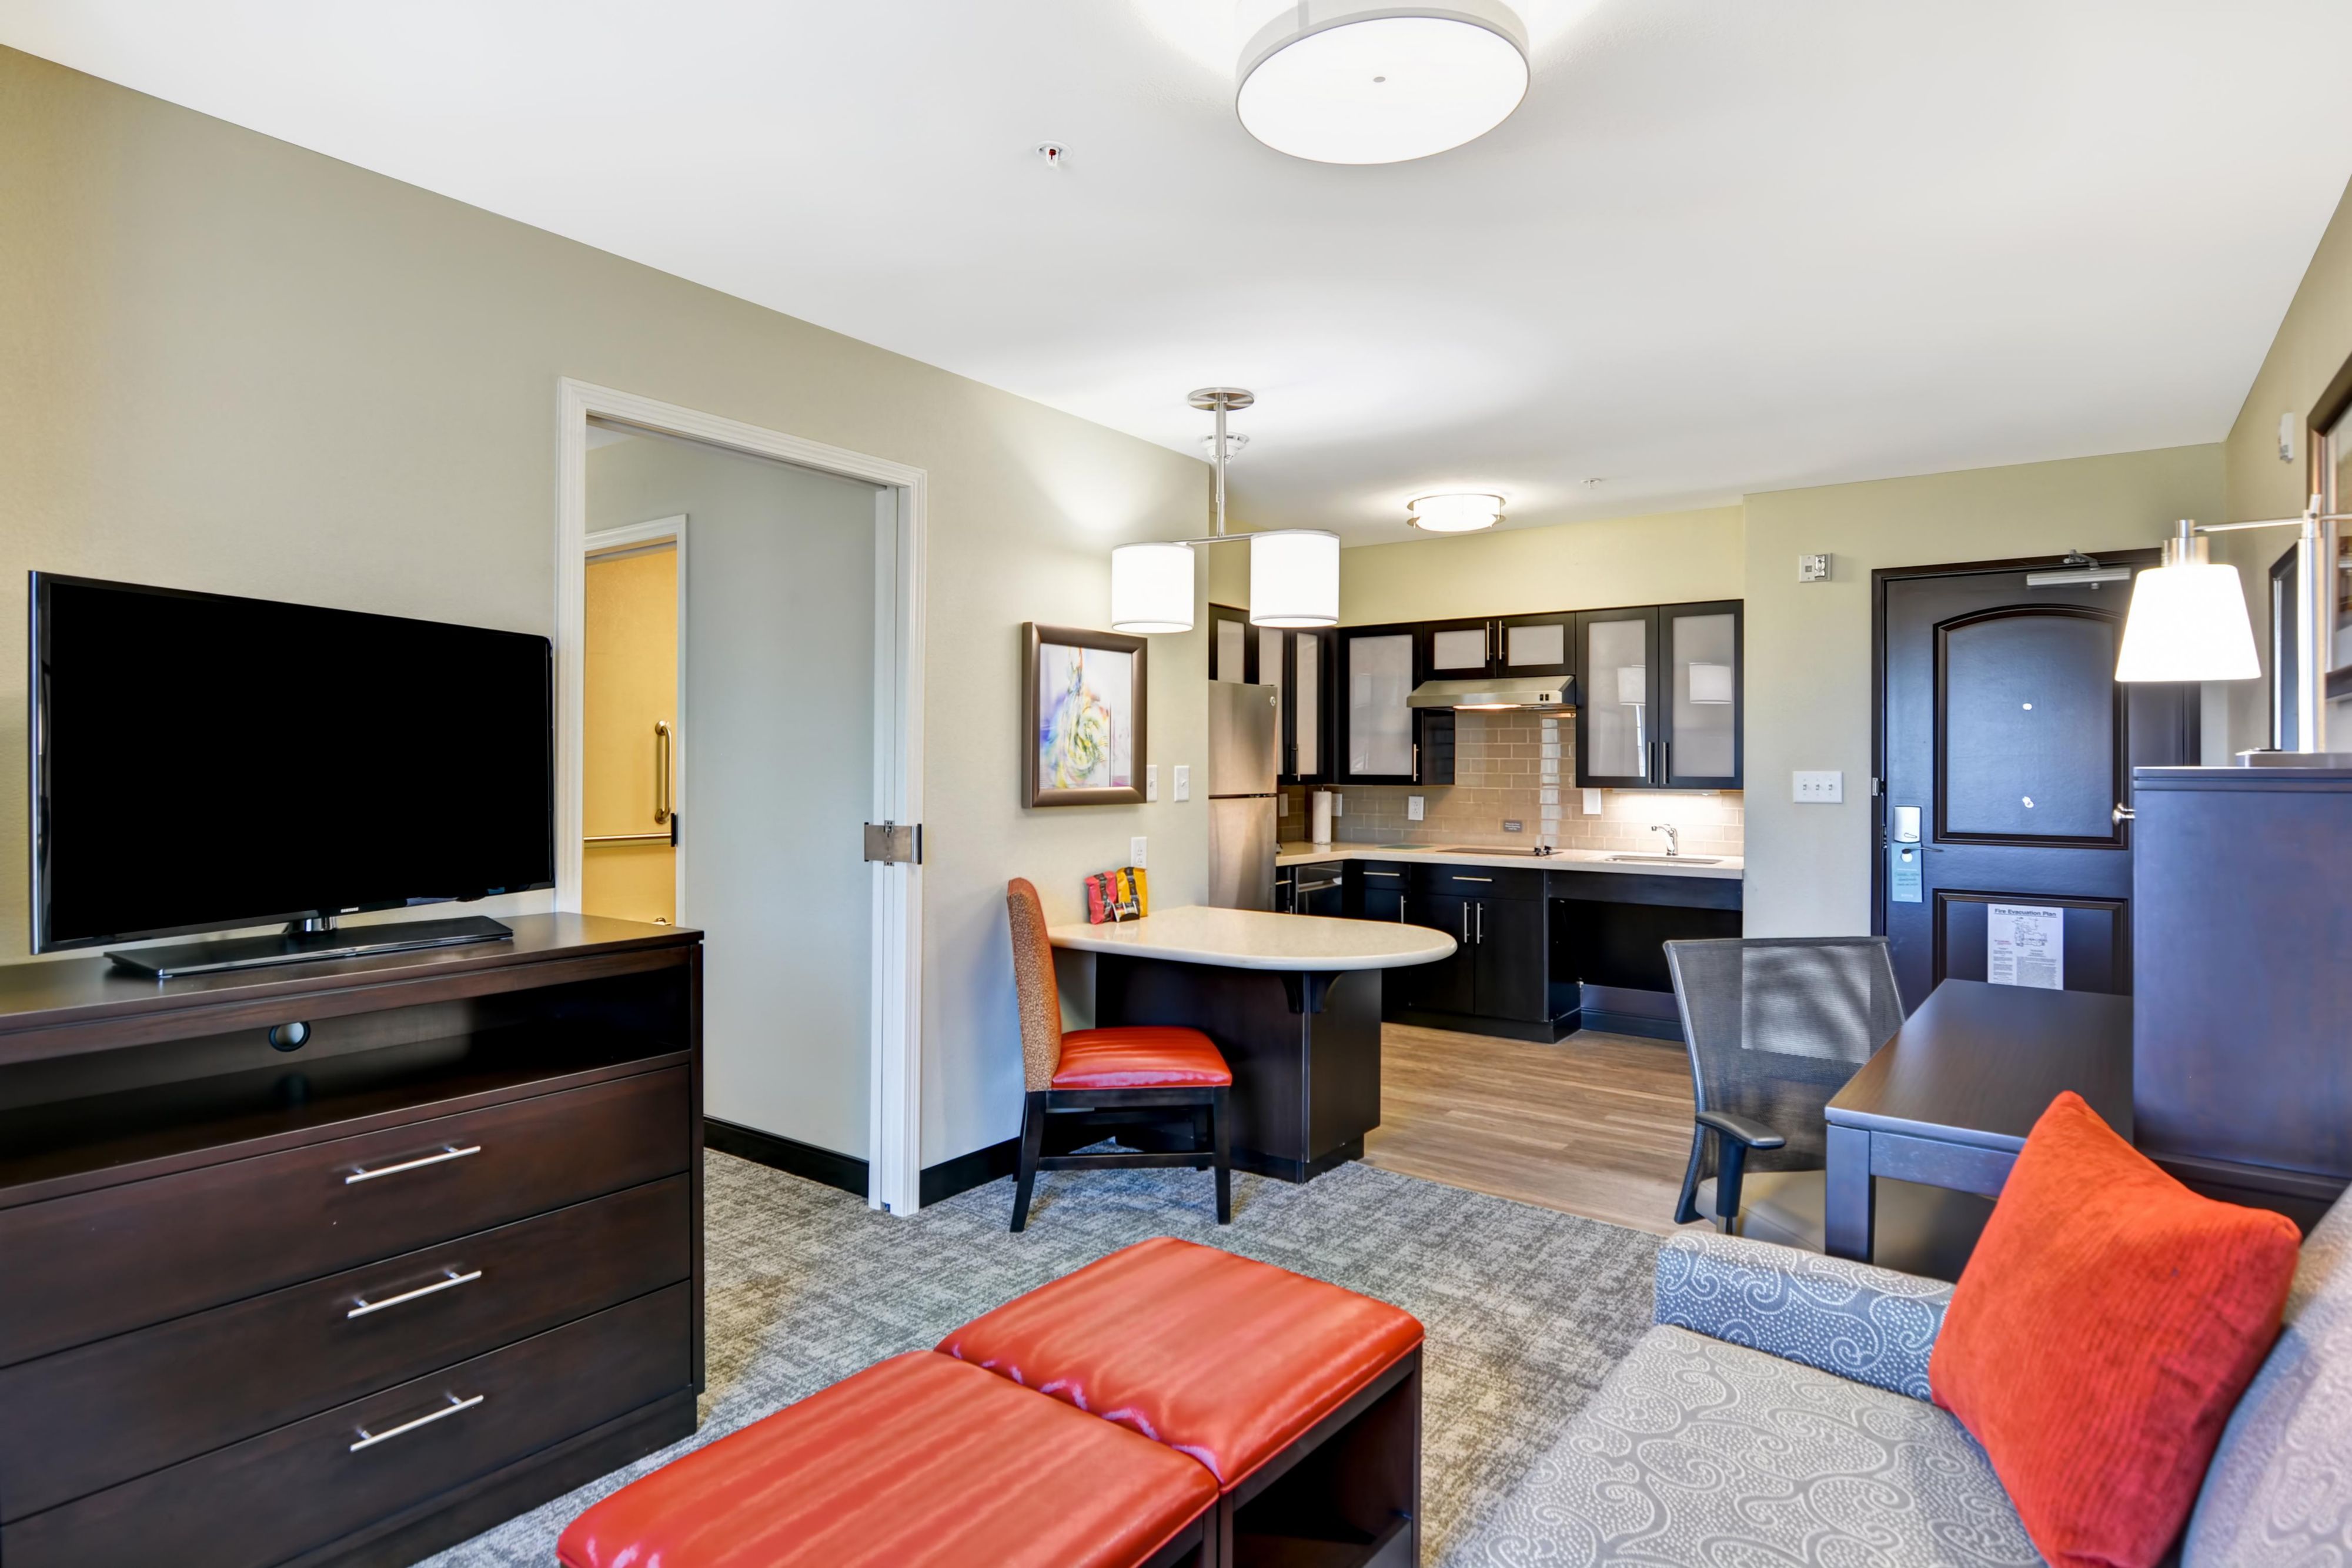 Keep life and work flowing in one and two-bedroom suites within minutes of Nashville. Our beautifully designed suites feature full kitchens, living areas, and ergonomic workspaces. Feel at home with flat-screen HDTVs, free Wi-Fi, refrigerators, and space for you and the kids. Start your day with our complimentary breakfast buffet in the lobby.